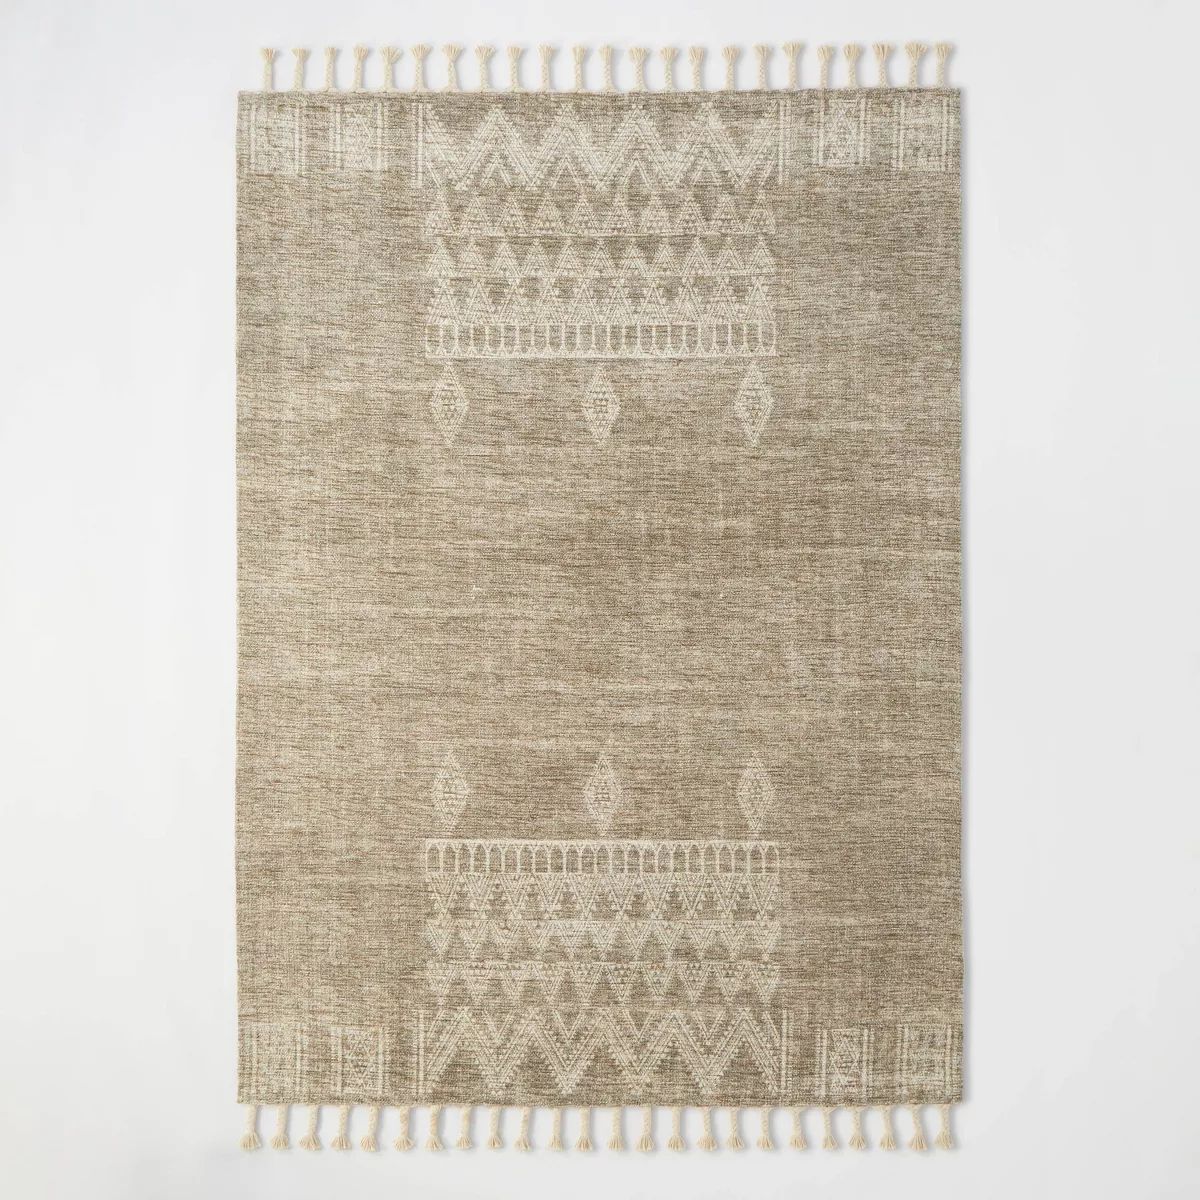 7'x10' Westlake Placed Persian Style Rug Tan - Threshold™ designed with Studio McGee | Target